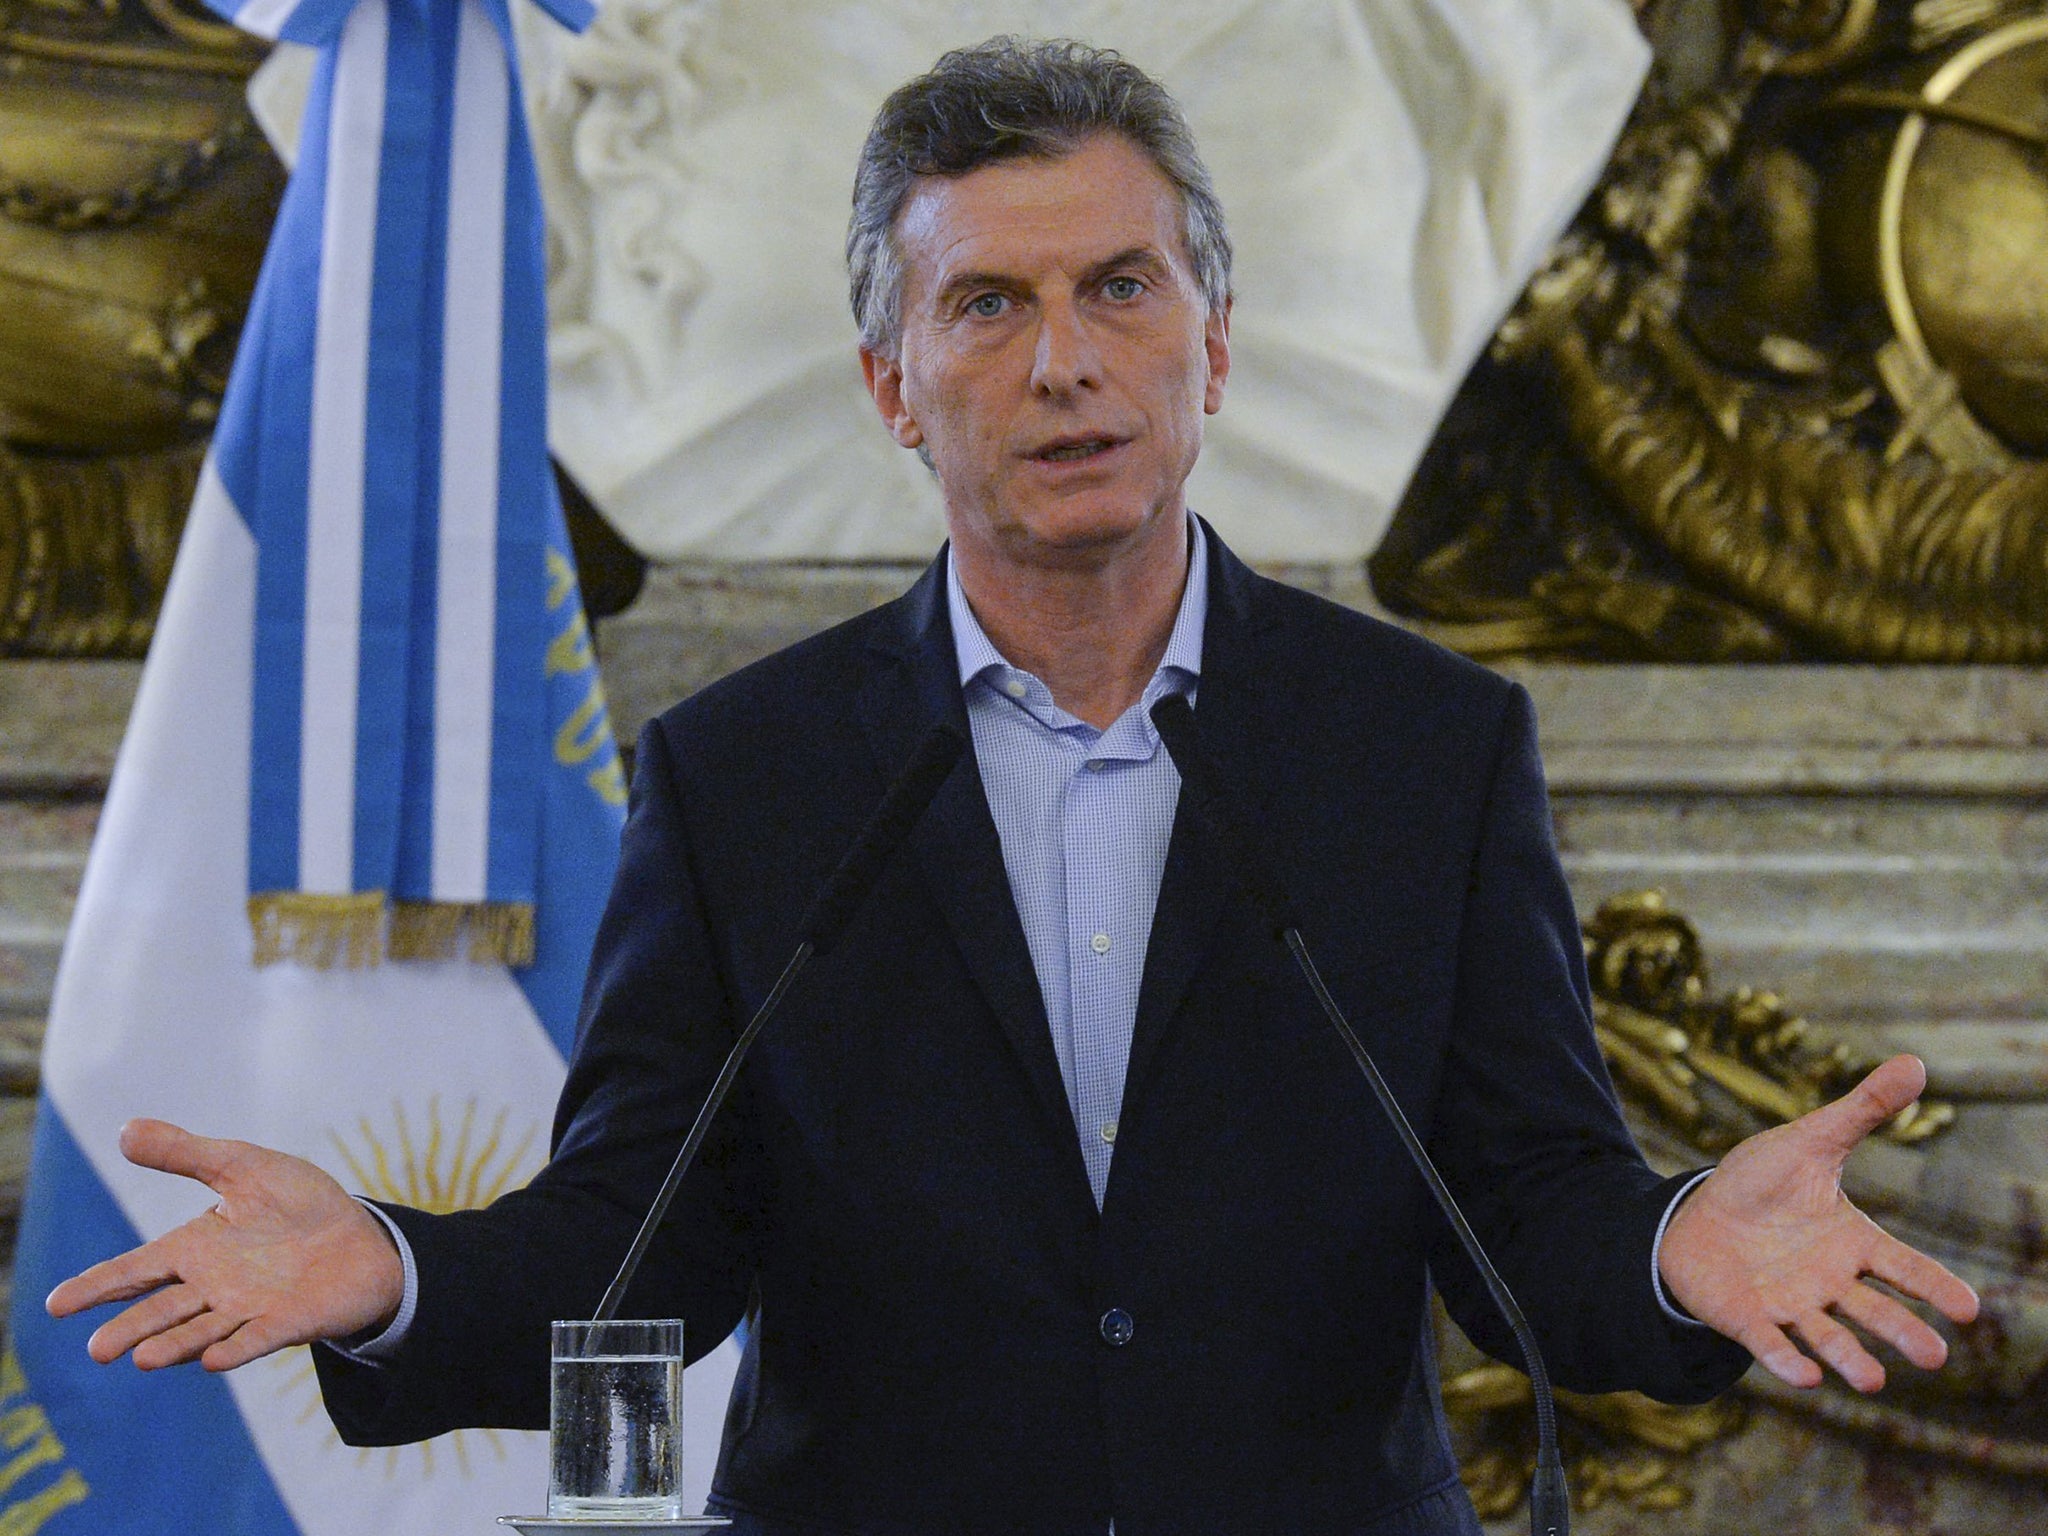 President Maurico Macri has implemented economic reforms and investor-friendly policies in Argentina